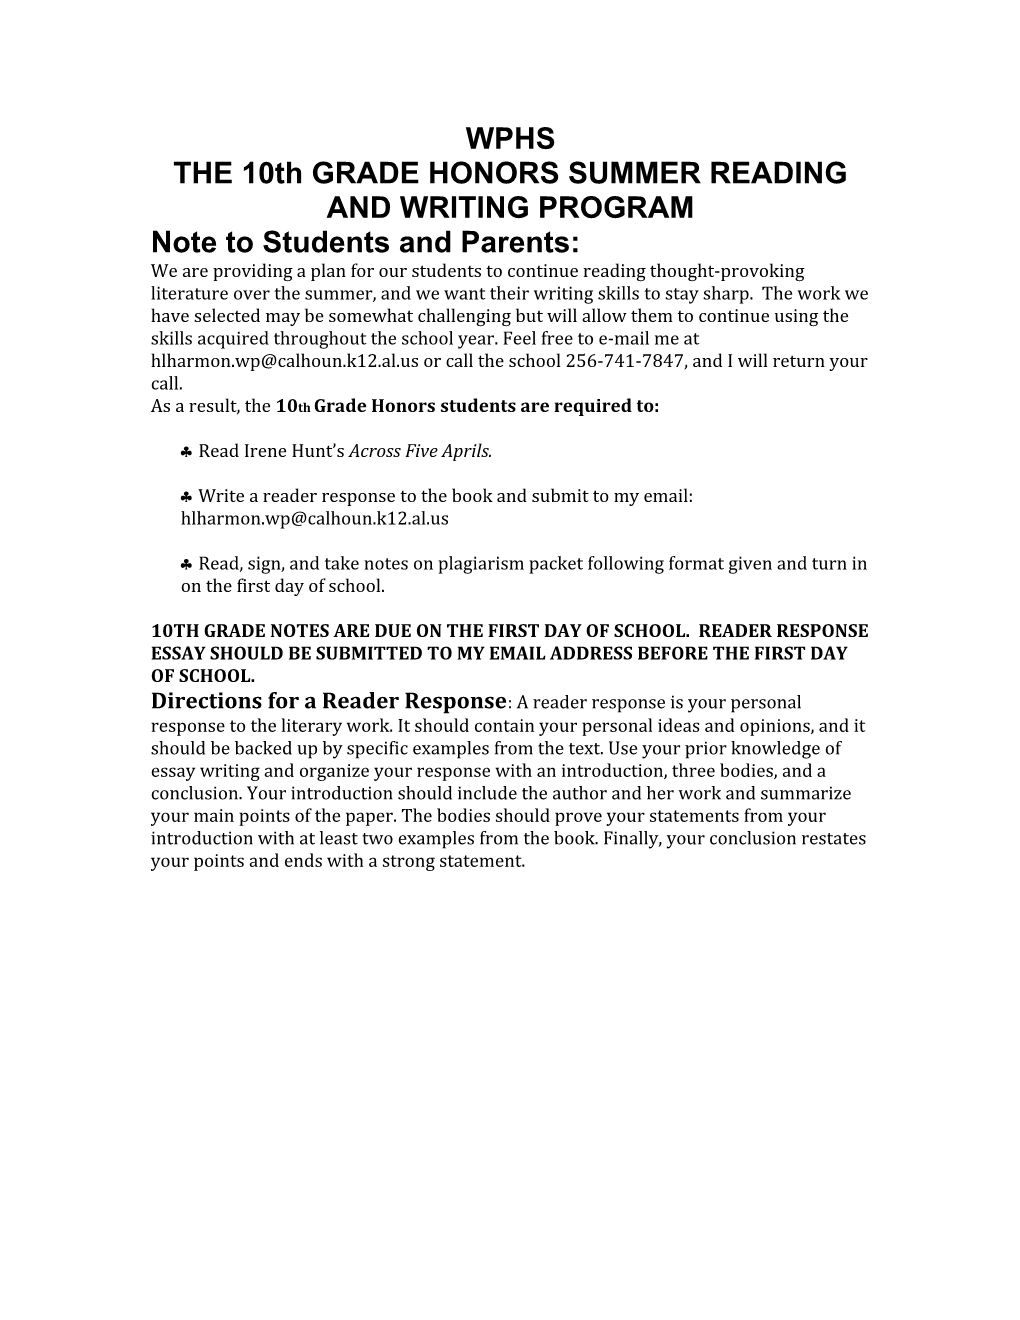 THE 10Th GRADE HONORS SUMMER READING and WRITING PROGRAM